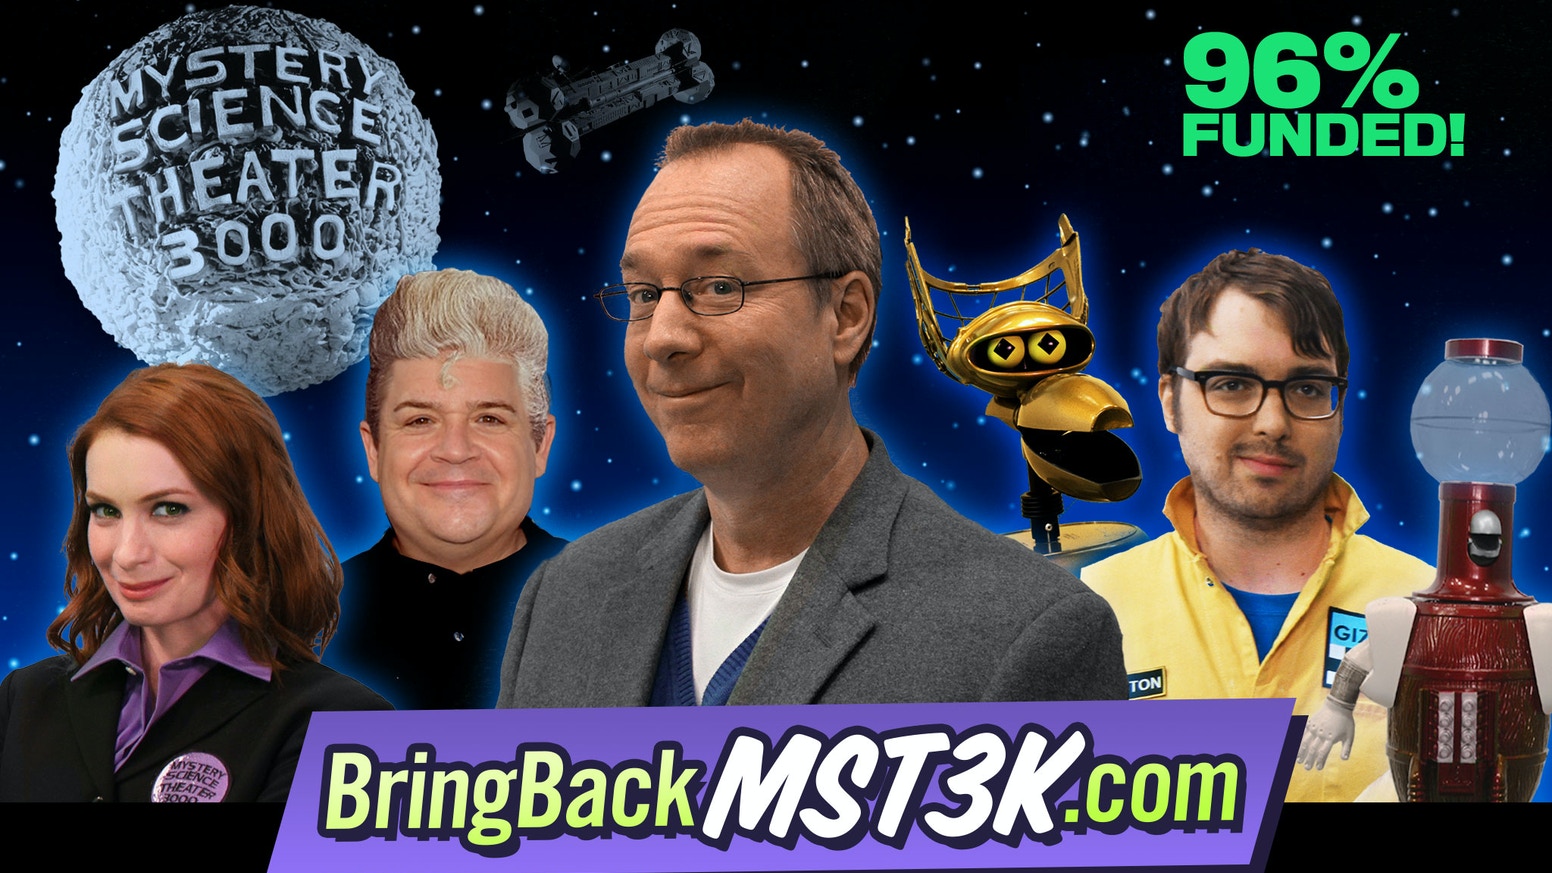 Bring Back Mystery Science Theater 3000 crowdfunding